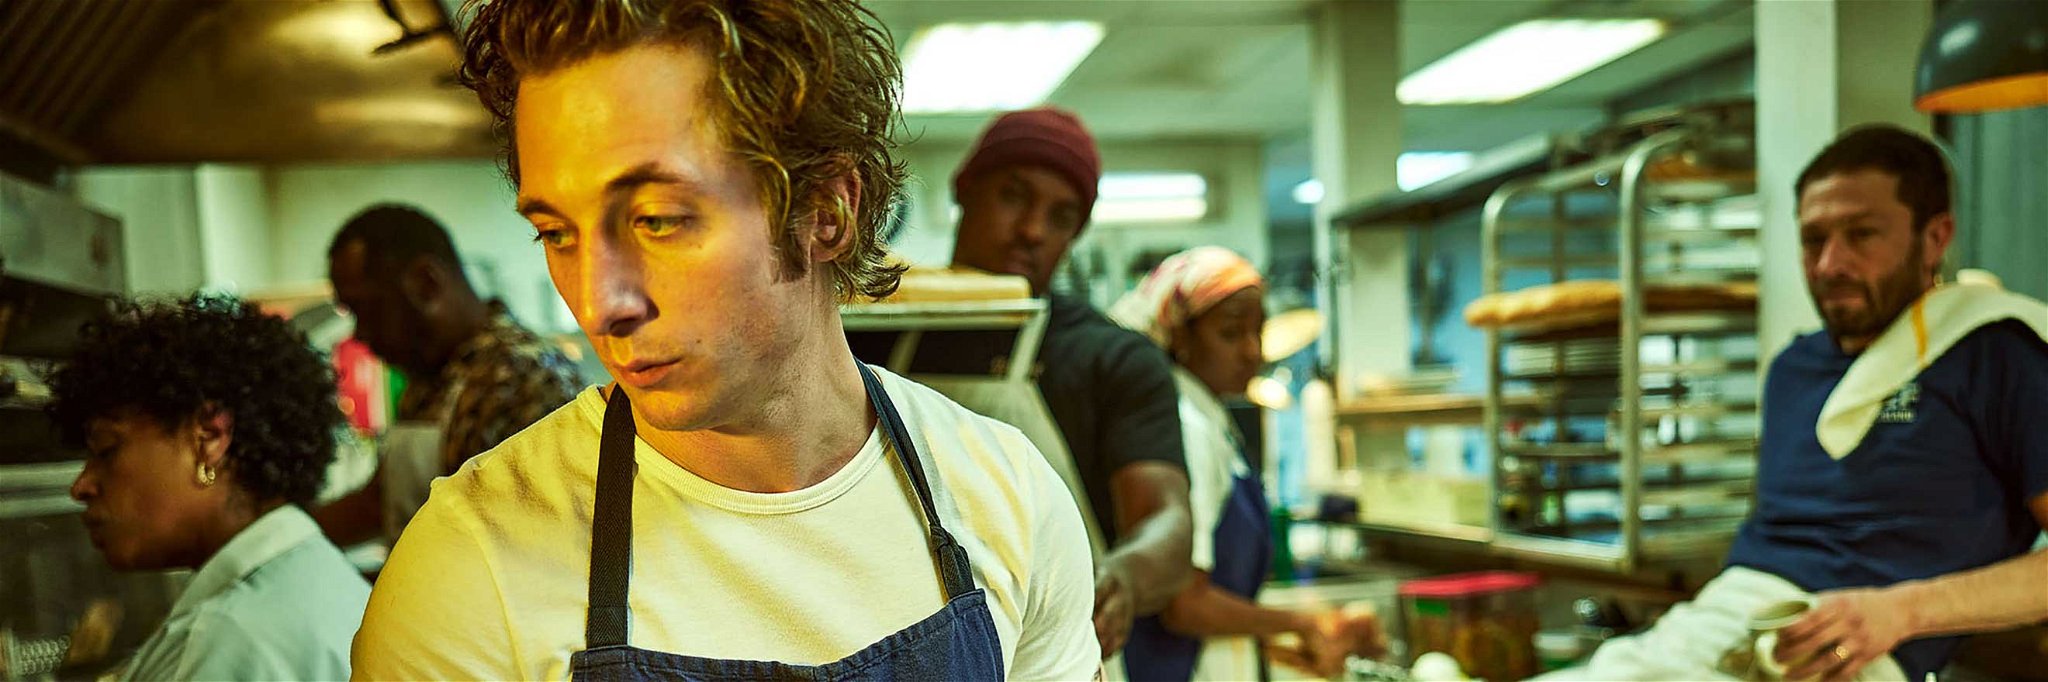 Carmy played by Jeremy Allen White has to prove himself in his new kitchen.